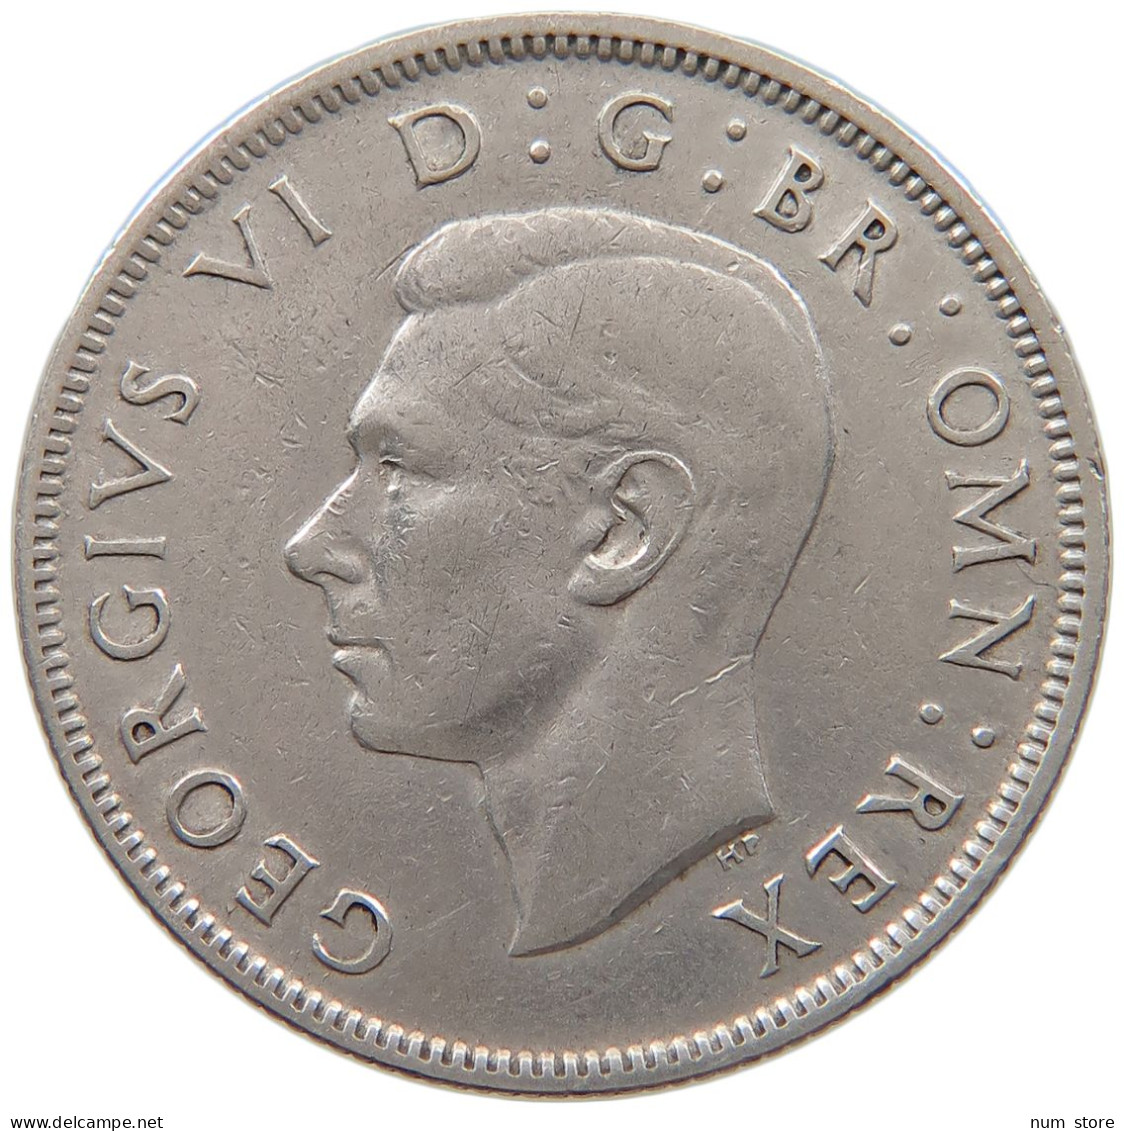 GREAT BRITAIN TWO SHILLINGS 1943 George VI. (1936-1952) #a052 0097 - J. 1 Florin / 2 Shillings